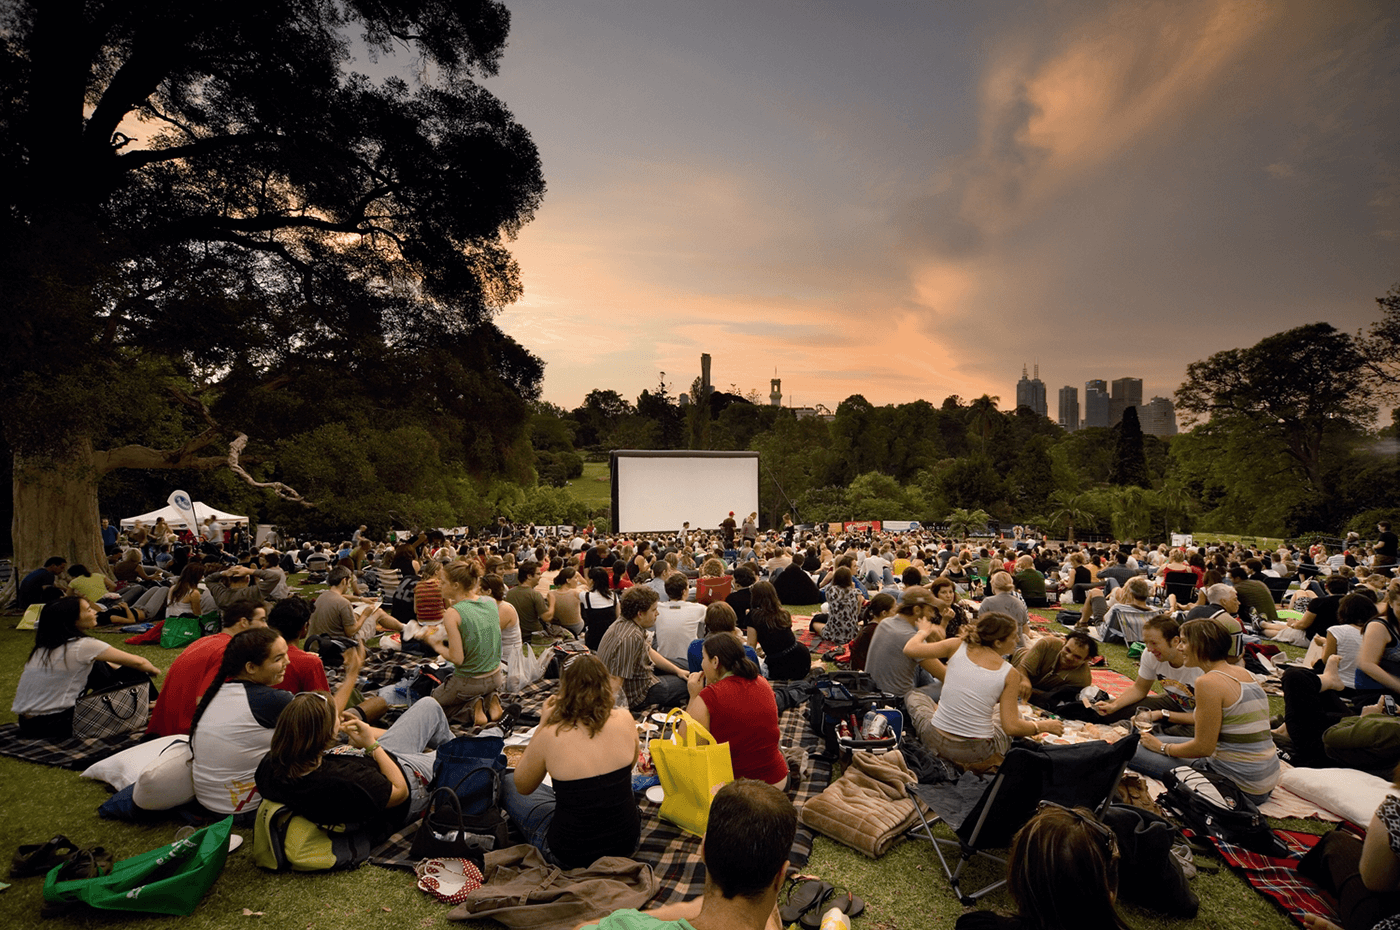 Screen, projector, console and sound for movies in the park